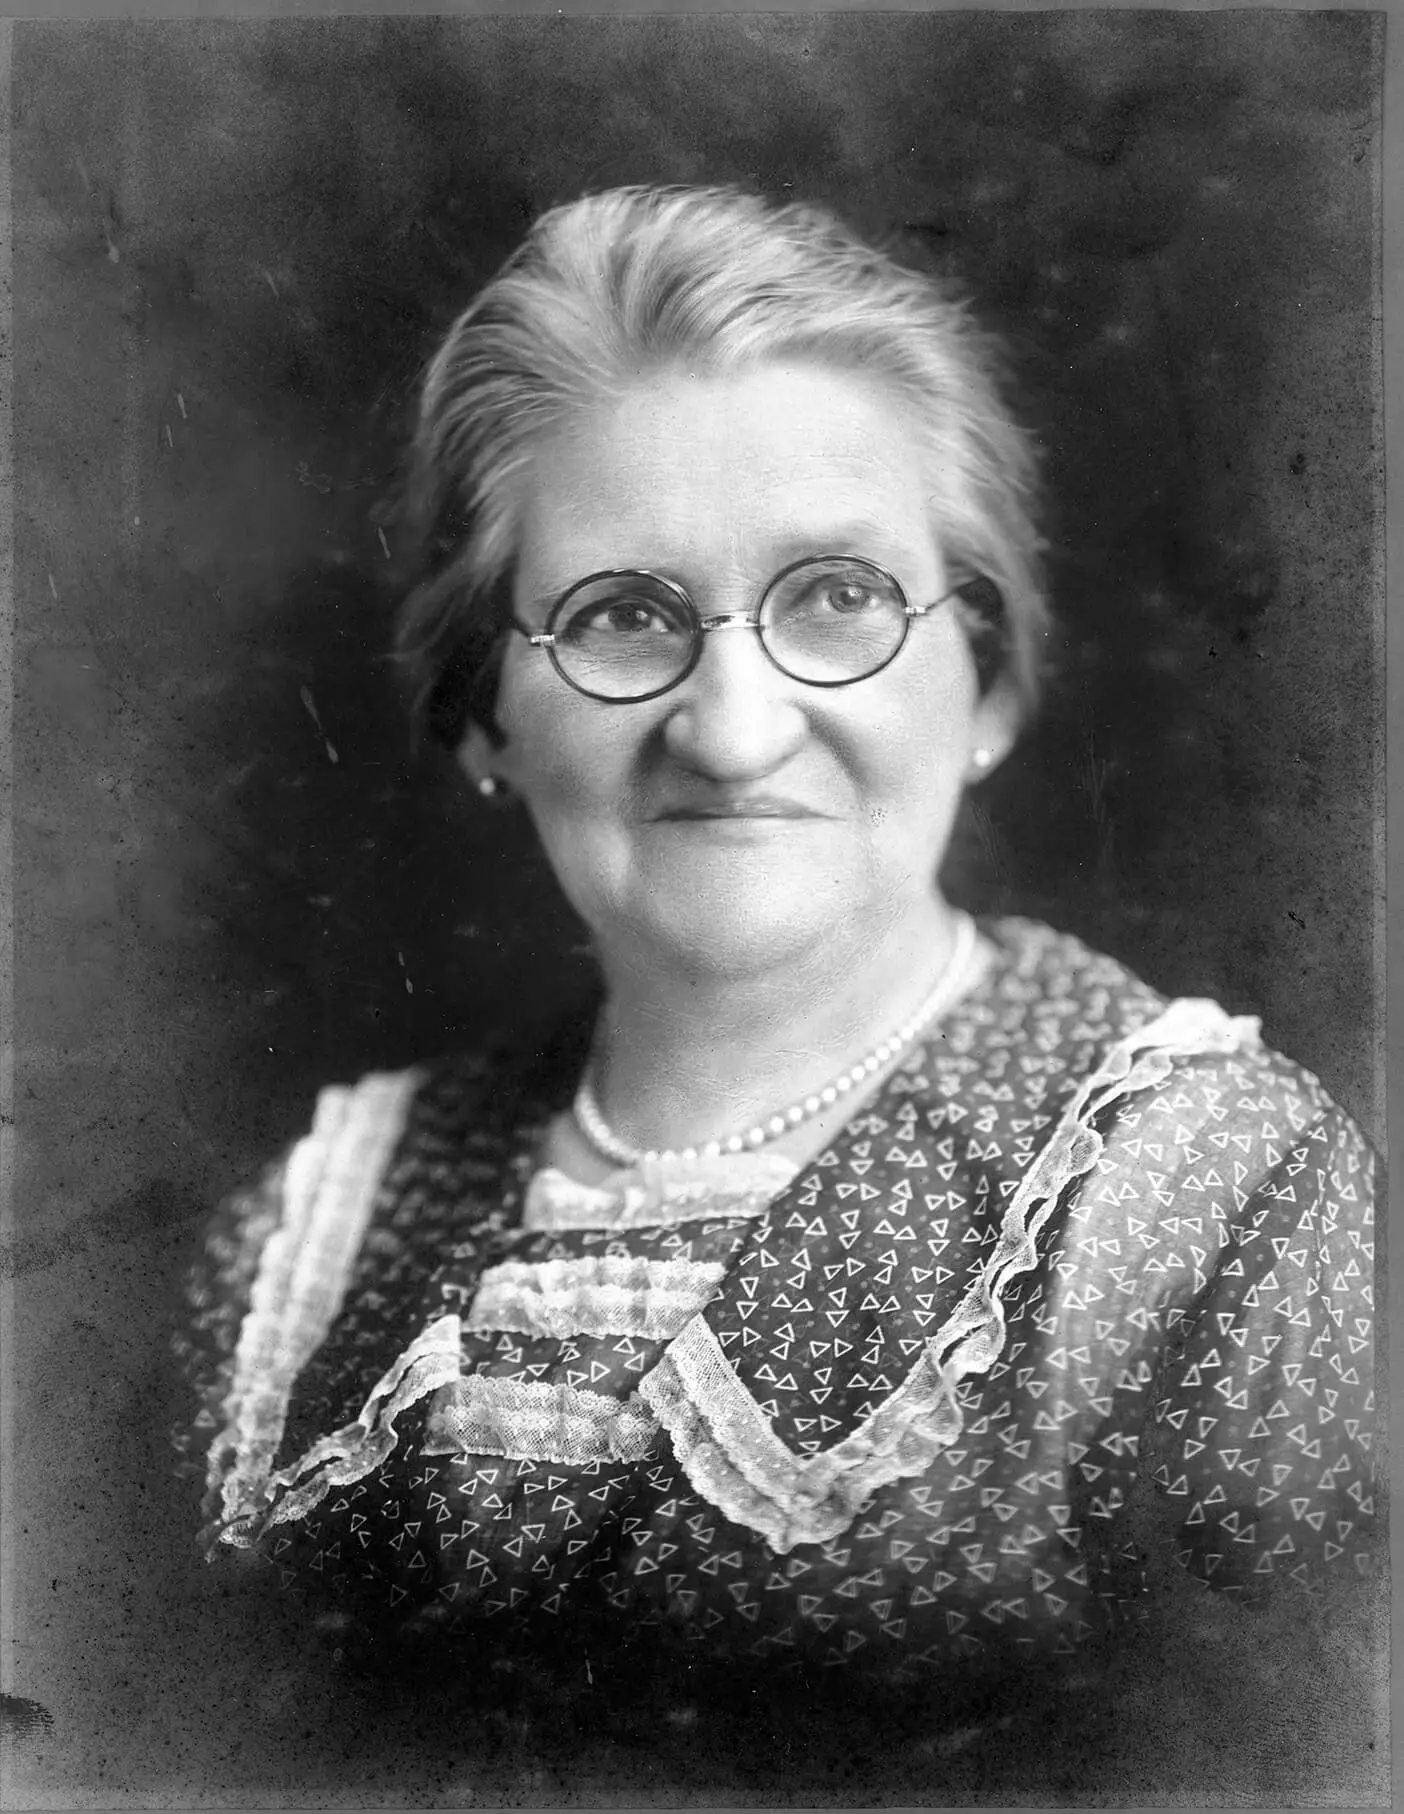 Black and white portrait of Augusta Mau, a middle aged woman in a triangle-patterned dress with lace trim, necklace, and wearing round glasses.